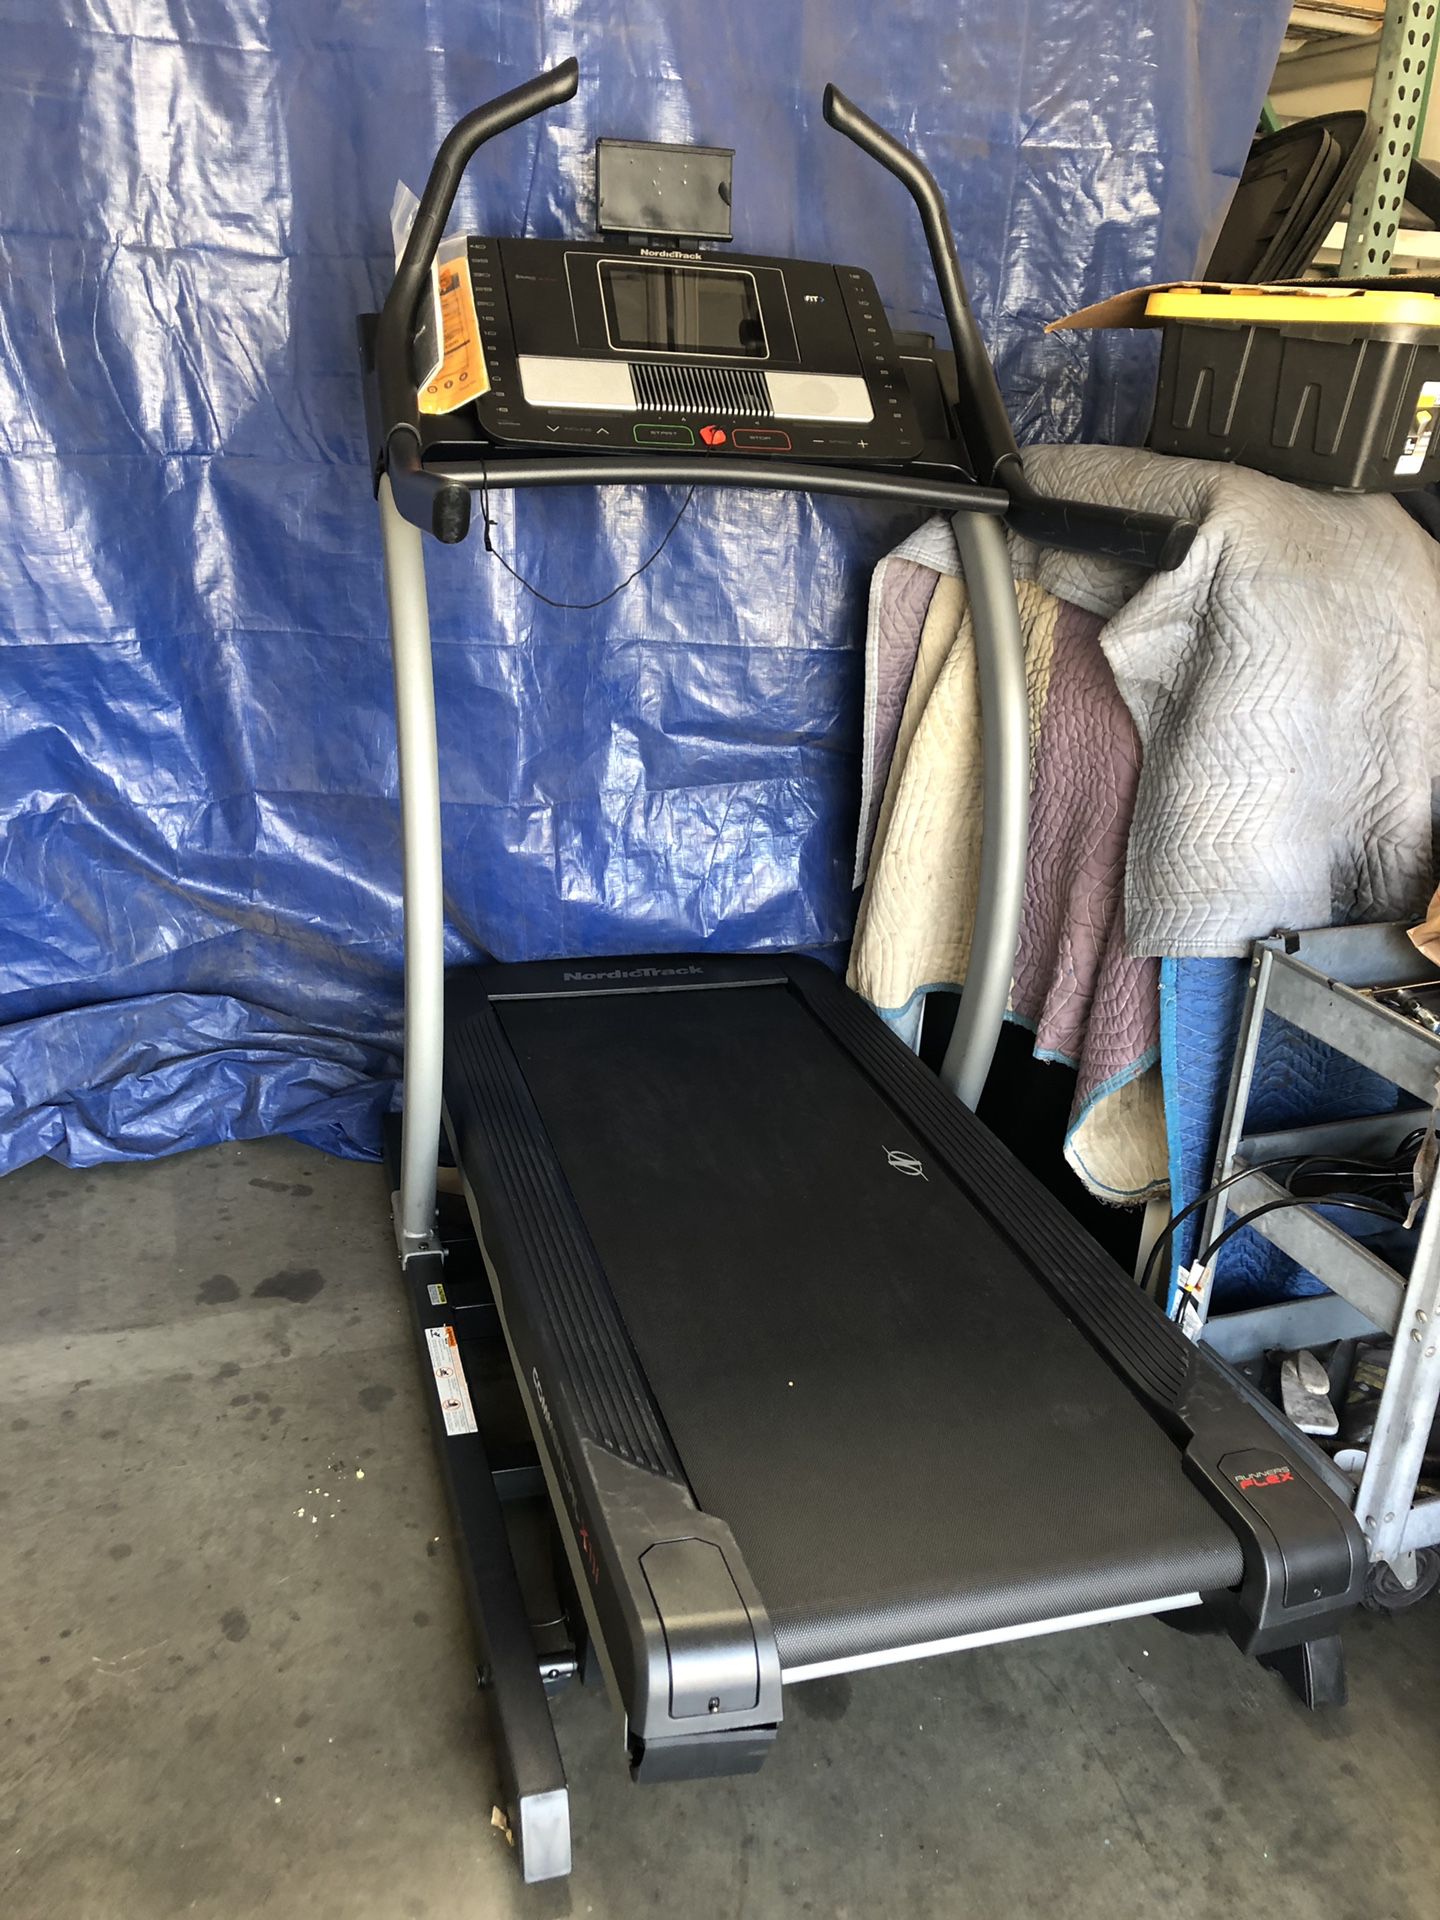 Nordictrack treadmill commercial x11i / brand new